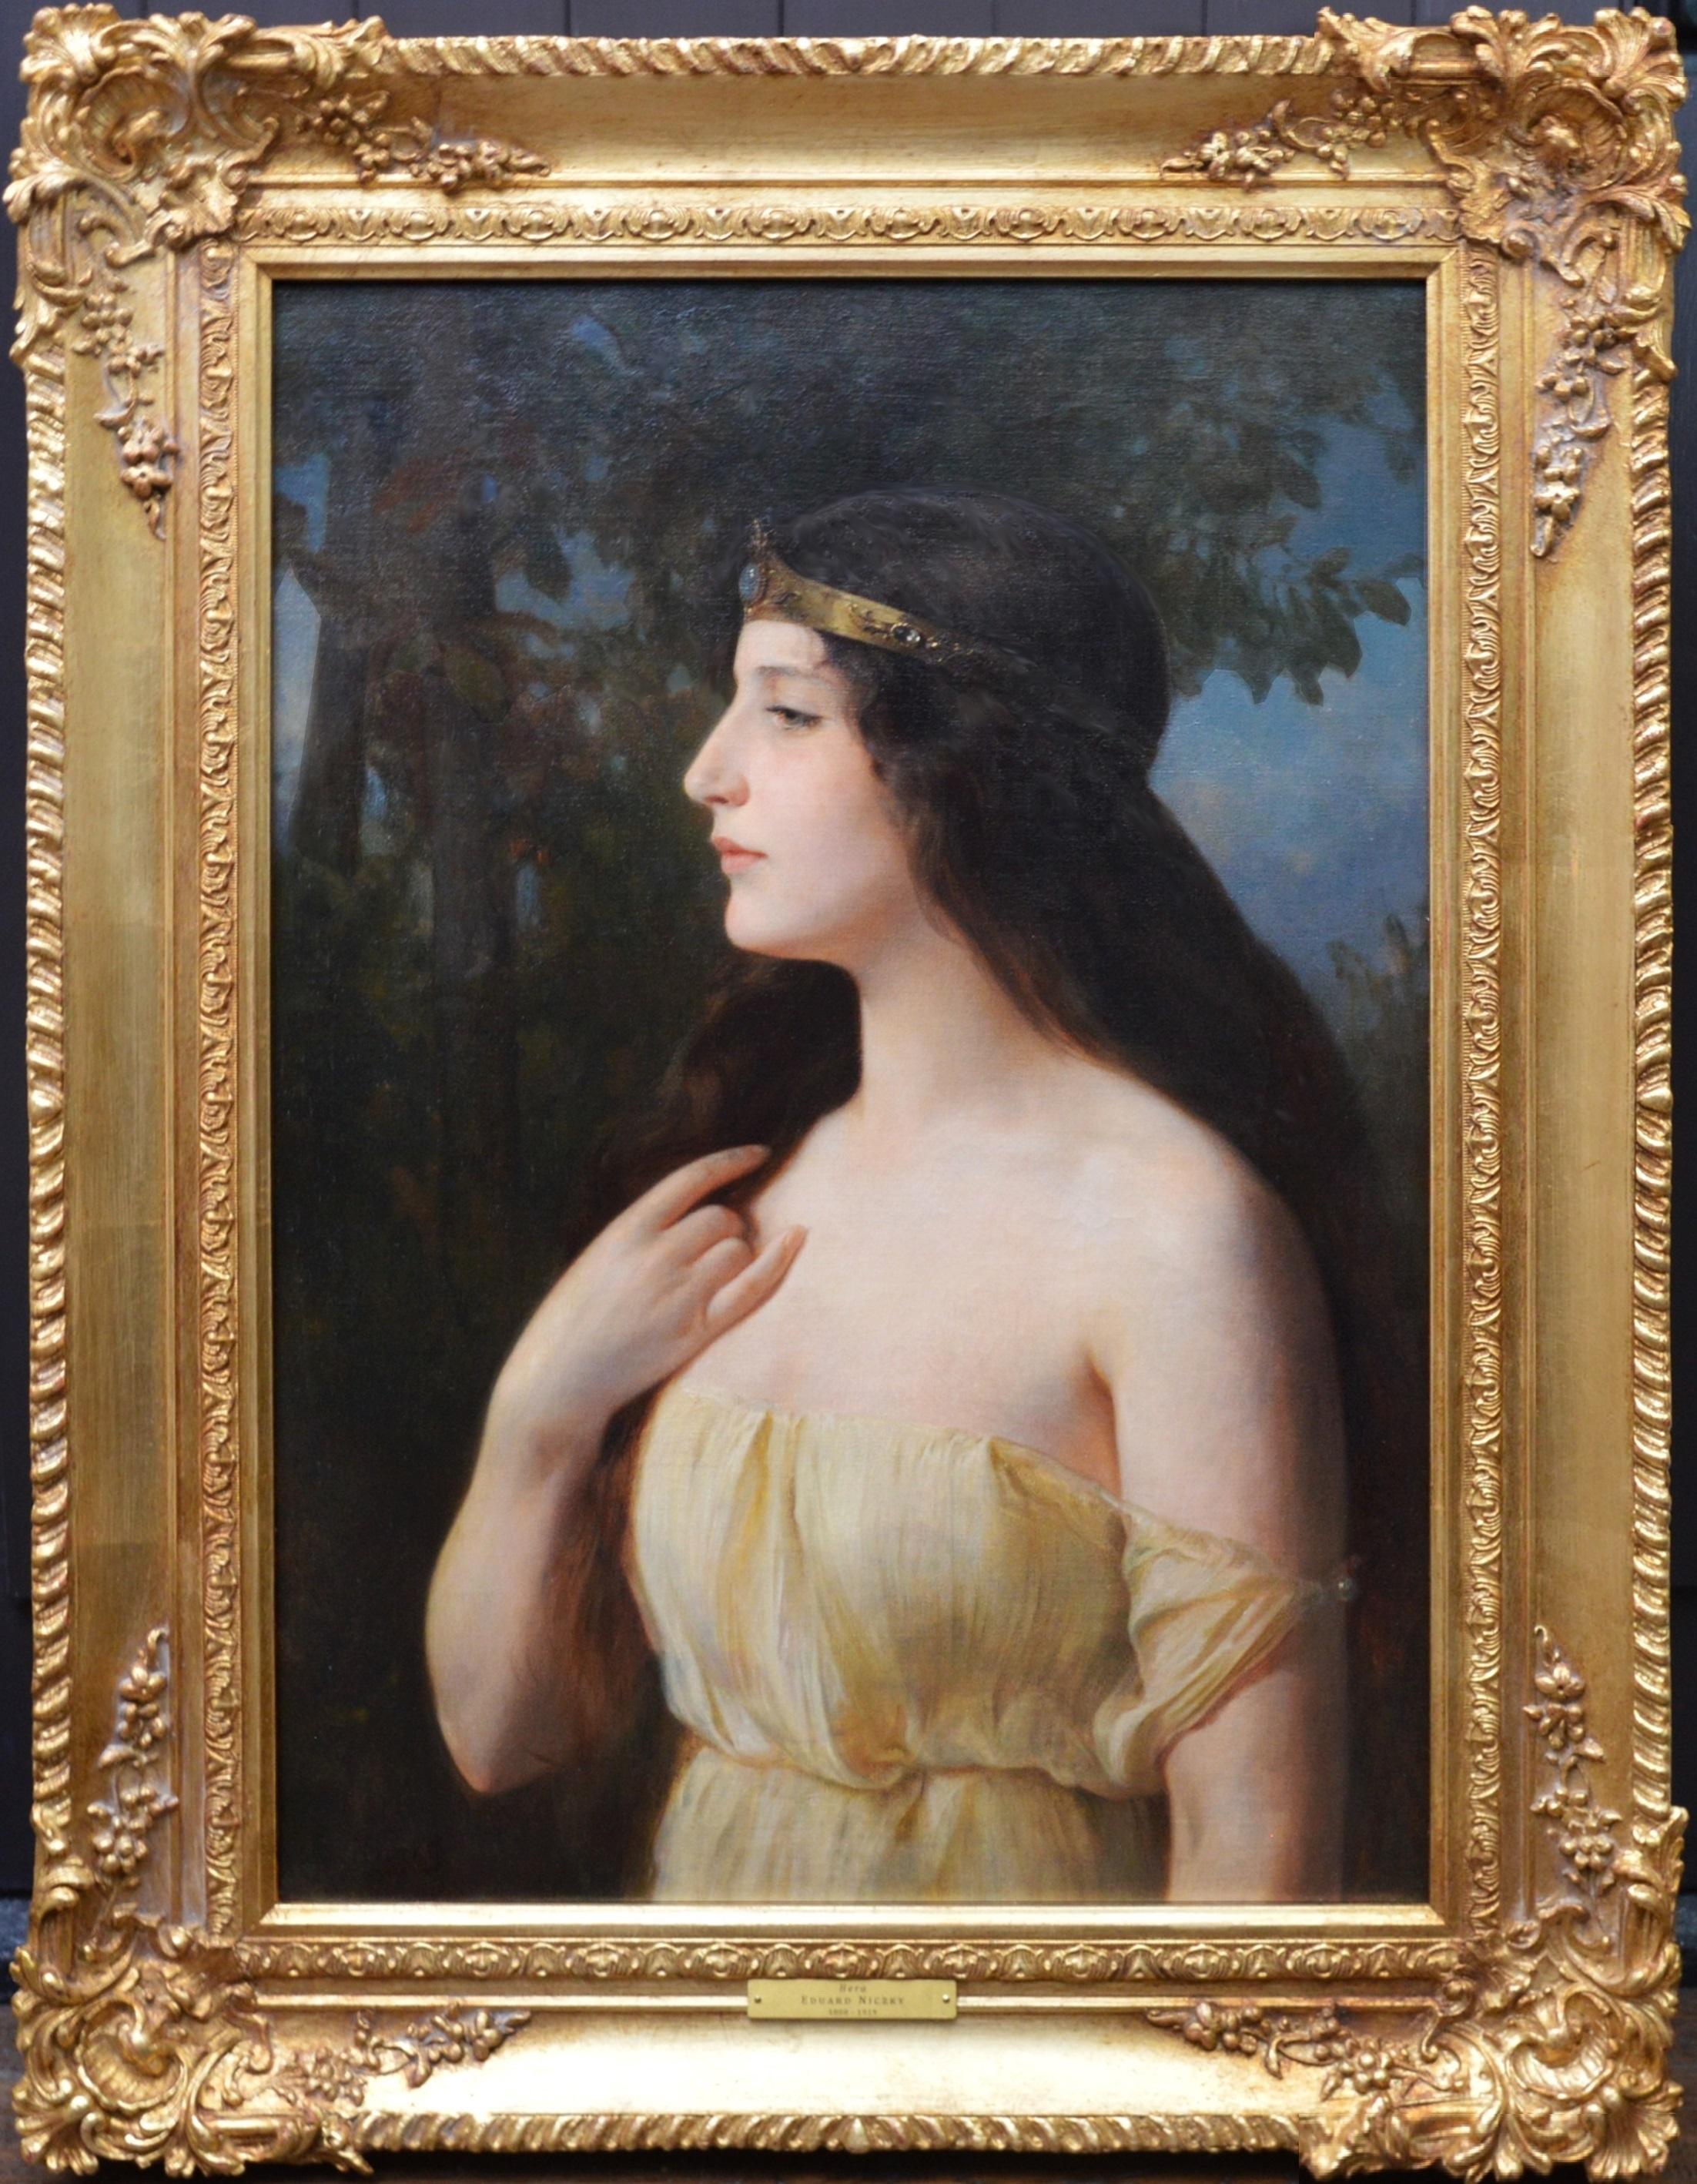 ‘Hera’ by Eduard Niczky (1850-1919). 

The painting - which depicts the Greek queen of the gods in golden diadem and yellow robe - is signed by the artist and hangs in a newly commissioned, bespoke gold metal leaf frame.

All our paintings are sold